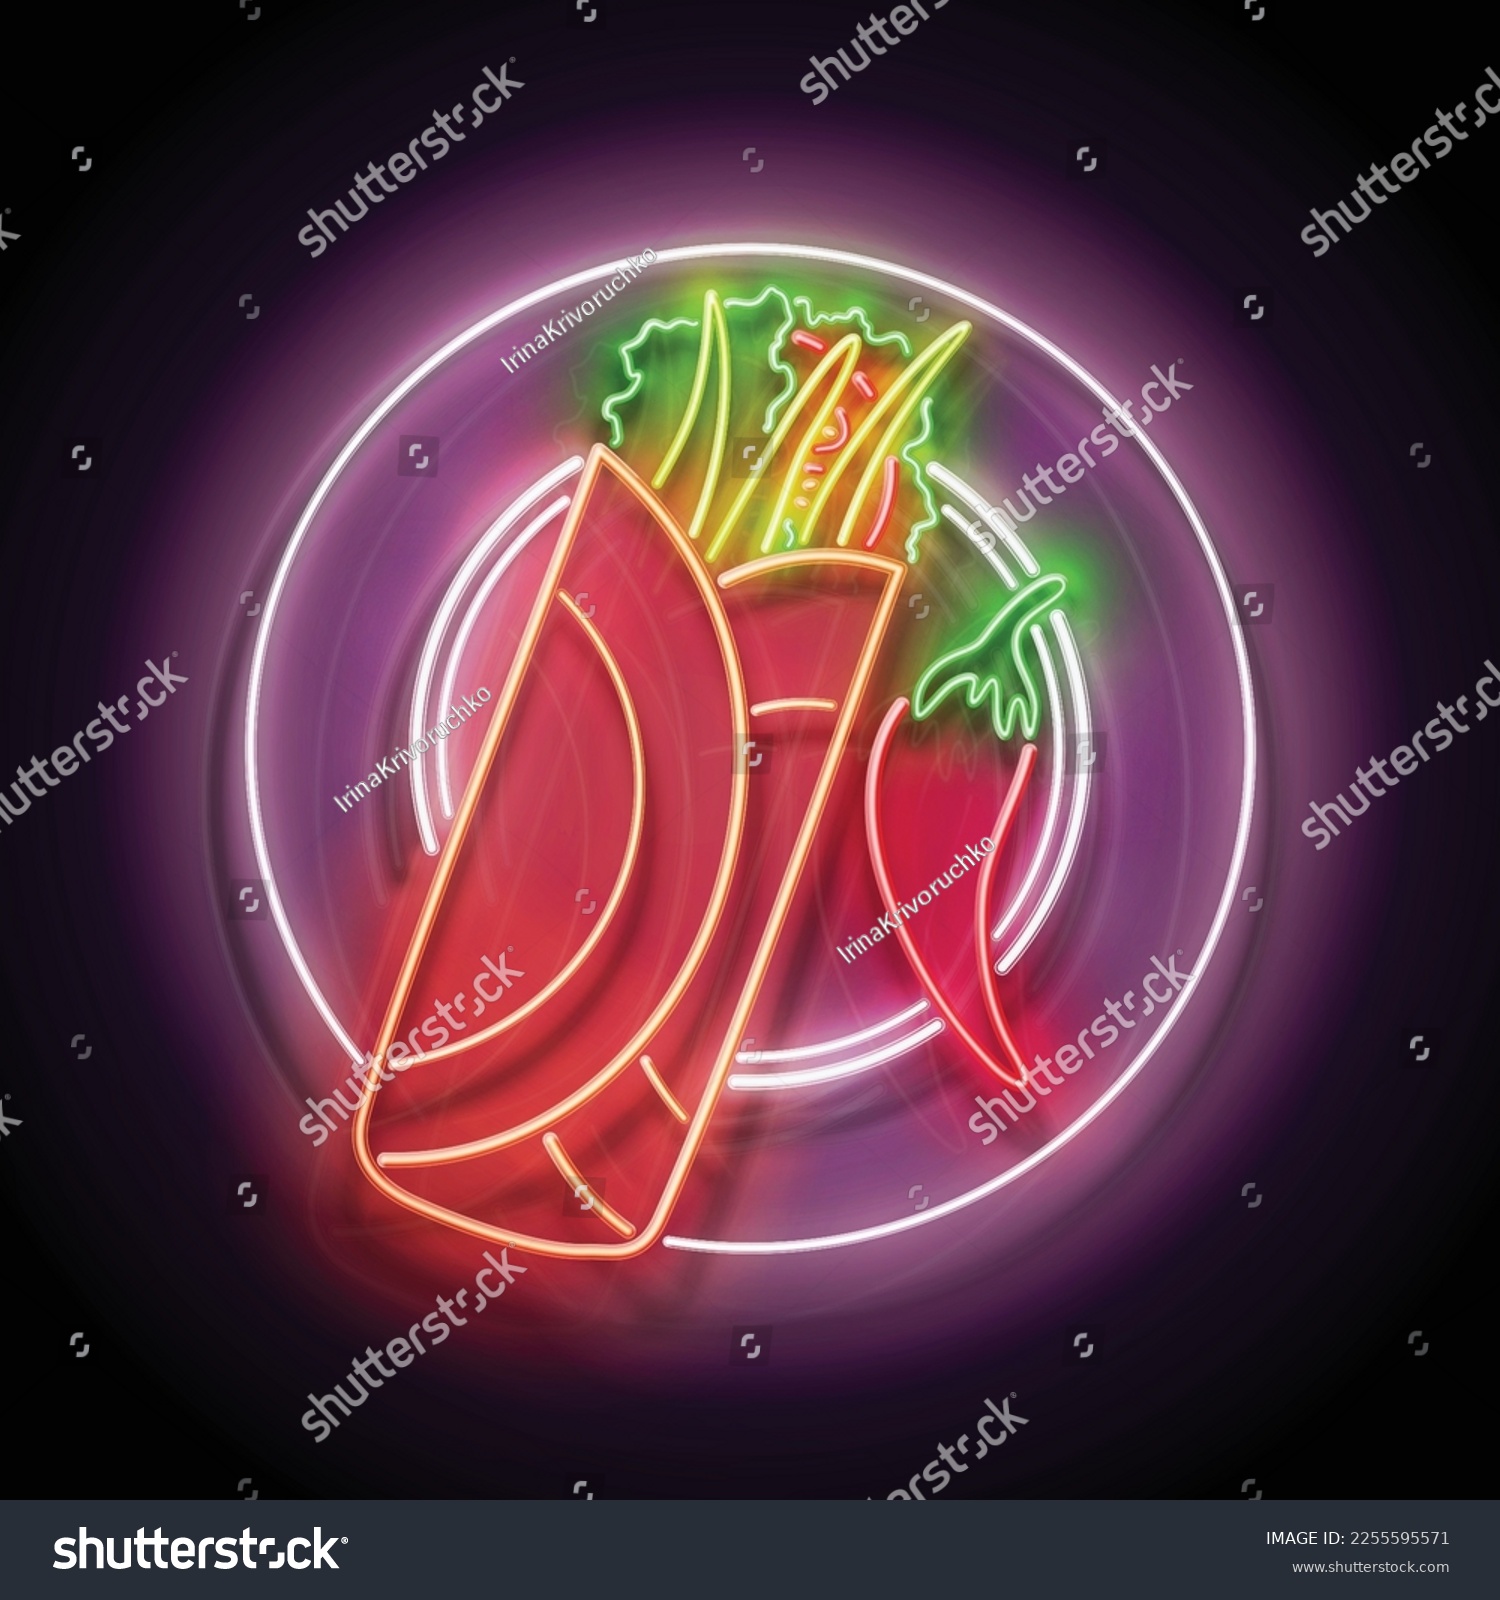 SVG of Glow Mexican spicy chimichanga on the plate. Traditional ethnic food, appetizer. Neon Light Poster, Flyer, Banner, Signboard. Glossy Background. Vector 3d Illustration  svg